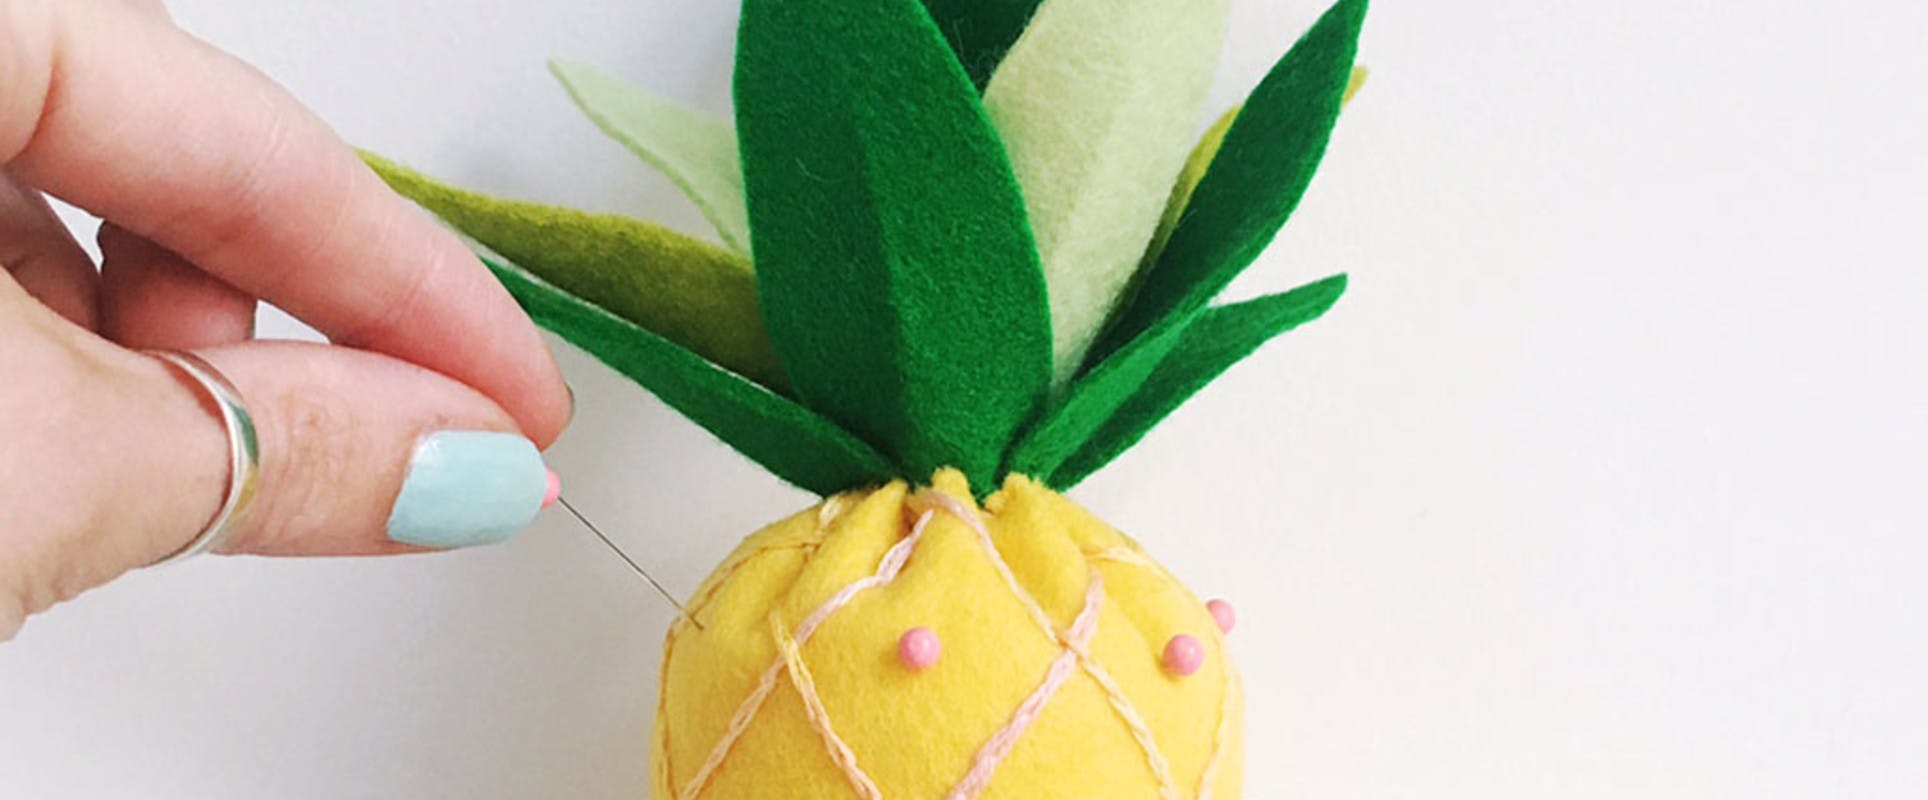 DIY Pineapple Pin Cushion from the Dollar store!